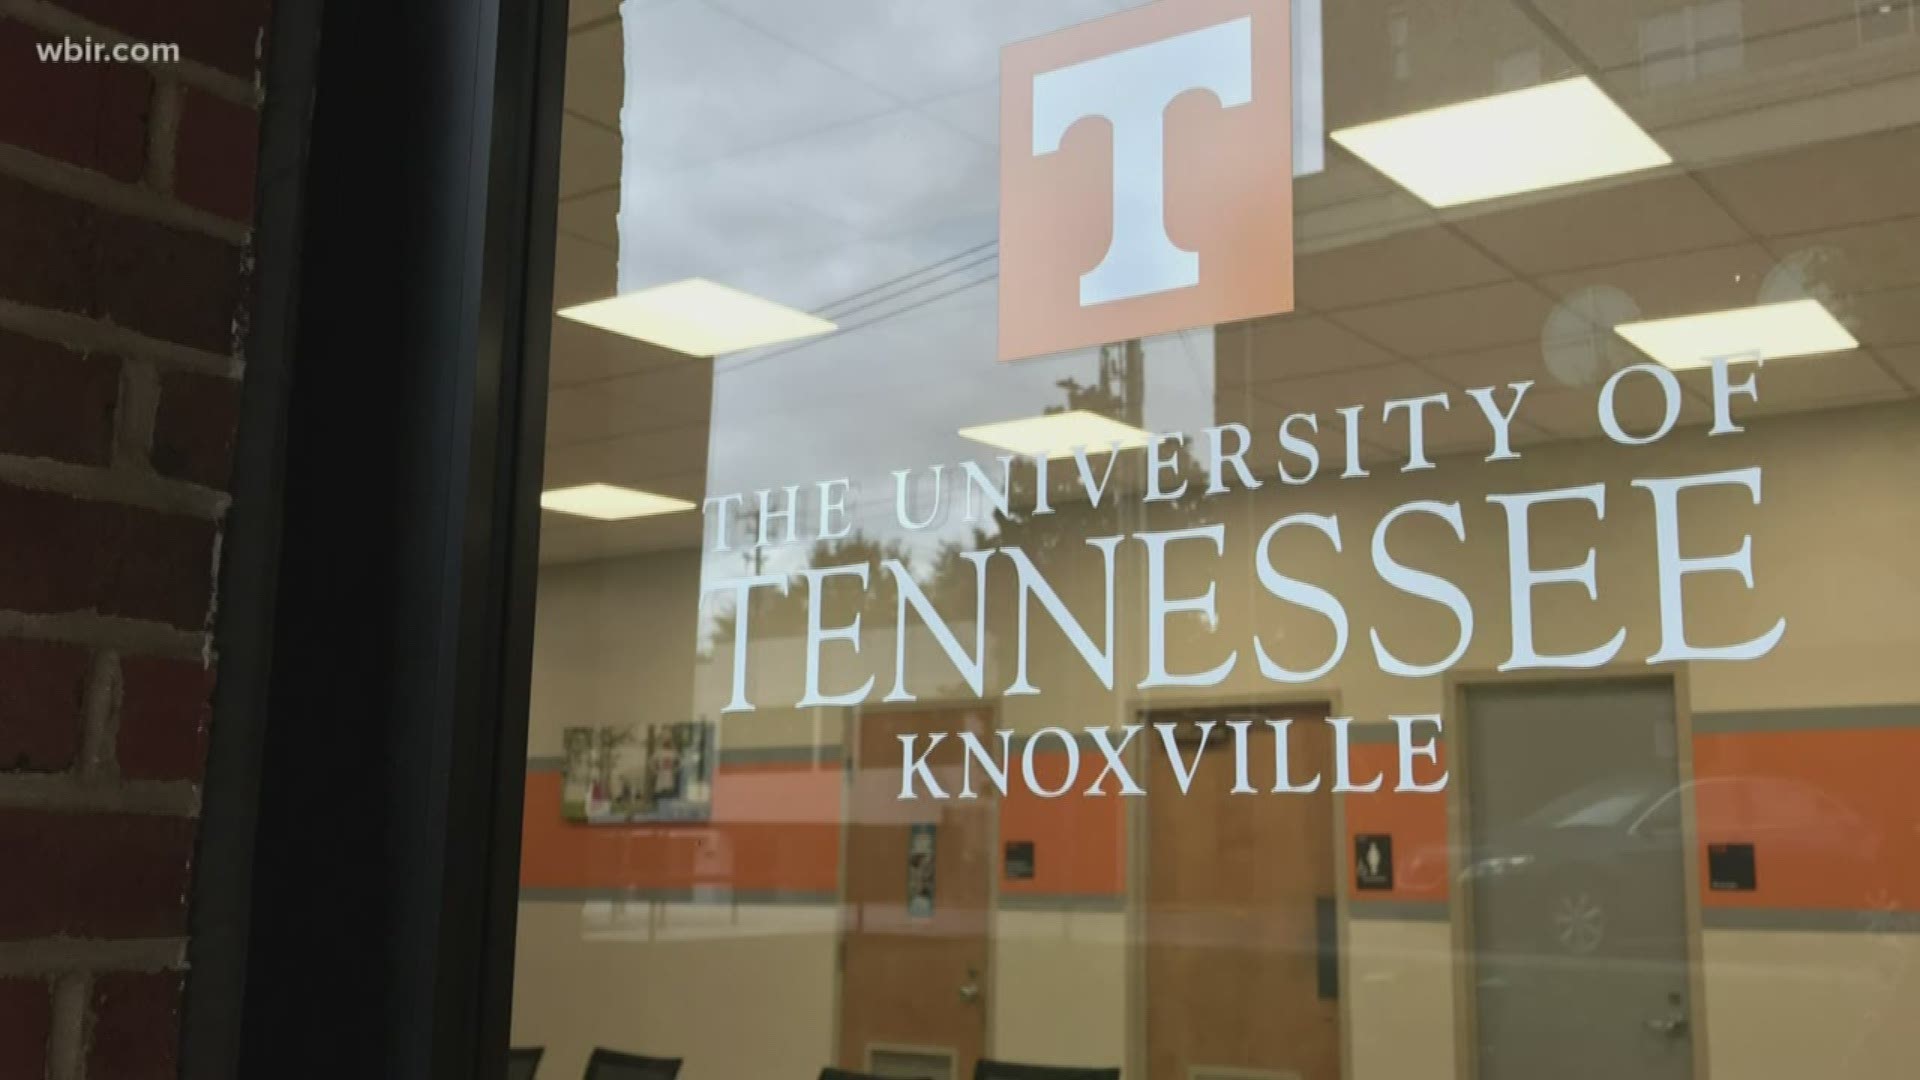 The University of Tennessee is joining a national push for more diversity among faculty and students.